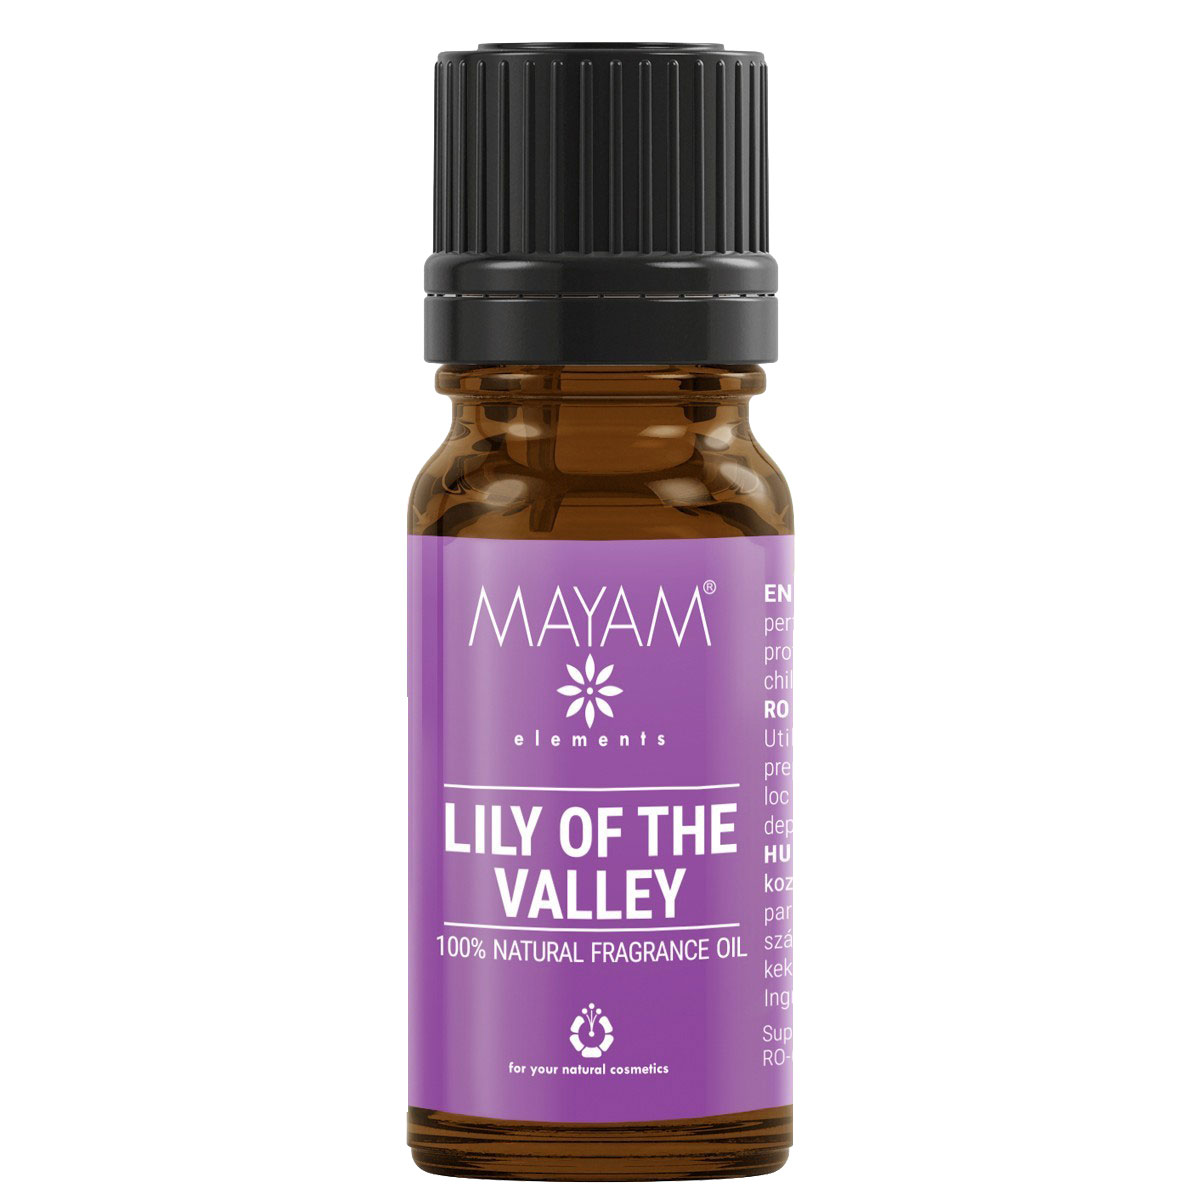 Parfumant natural Elemental, Lily of the Valley, 10 ml lila-rossa.ro imagine noua 2022